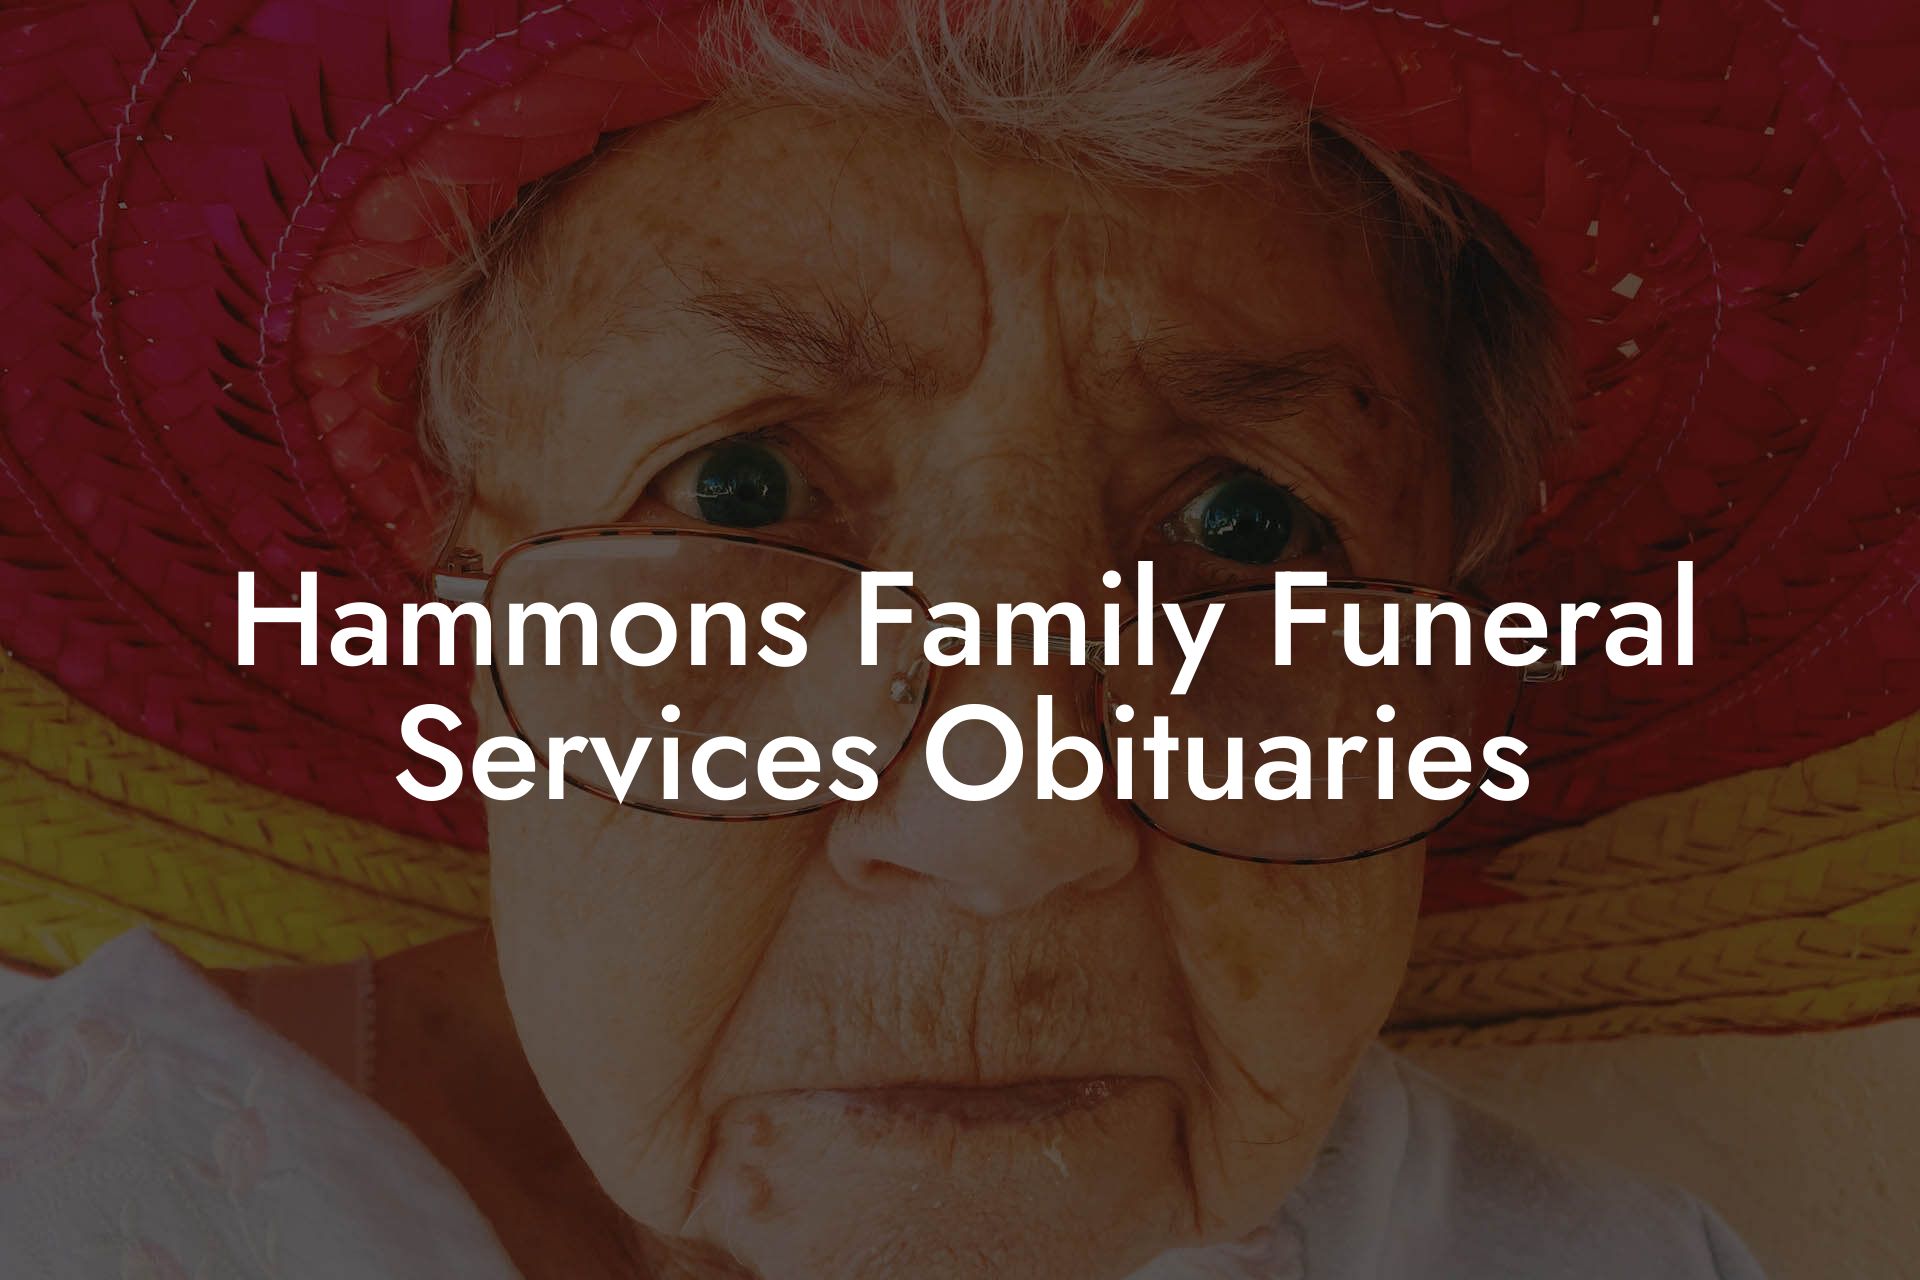 Hammons Family Funeral Services Obituaries